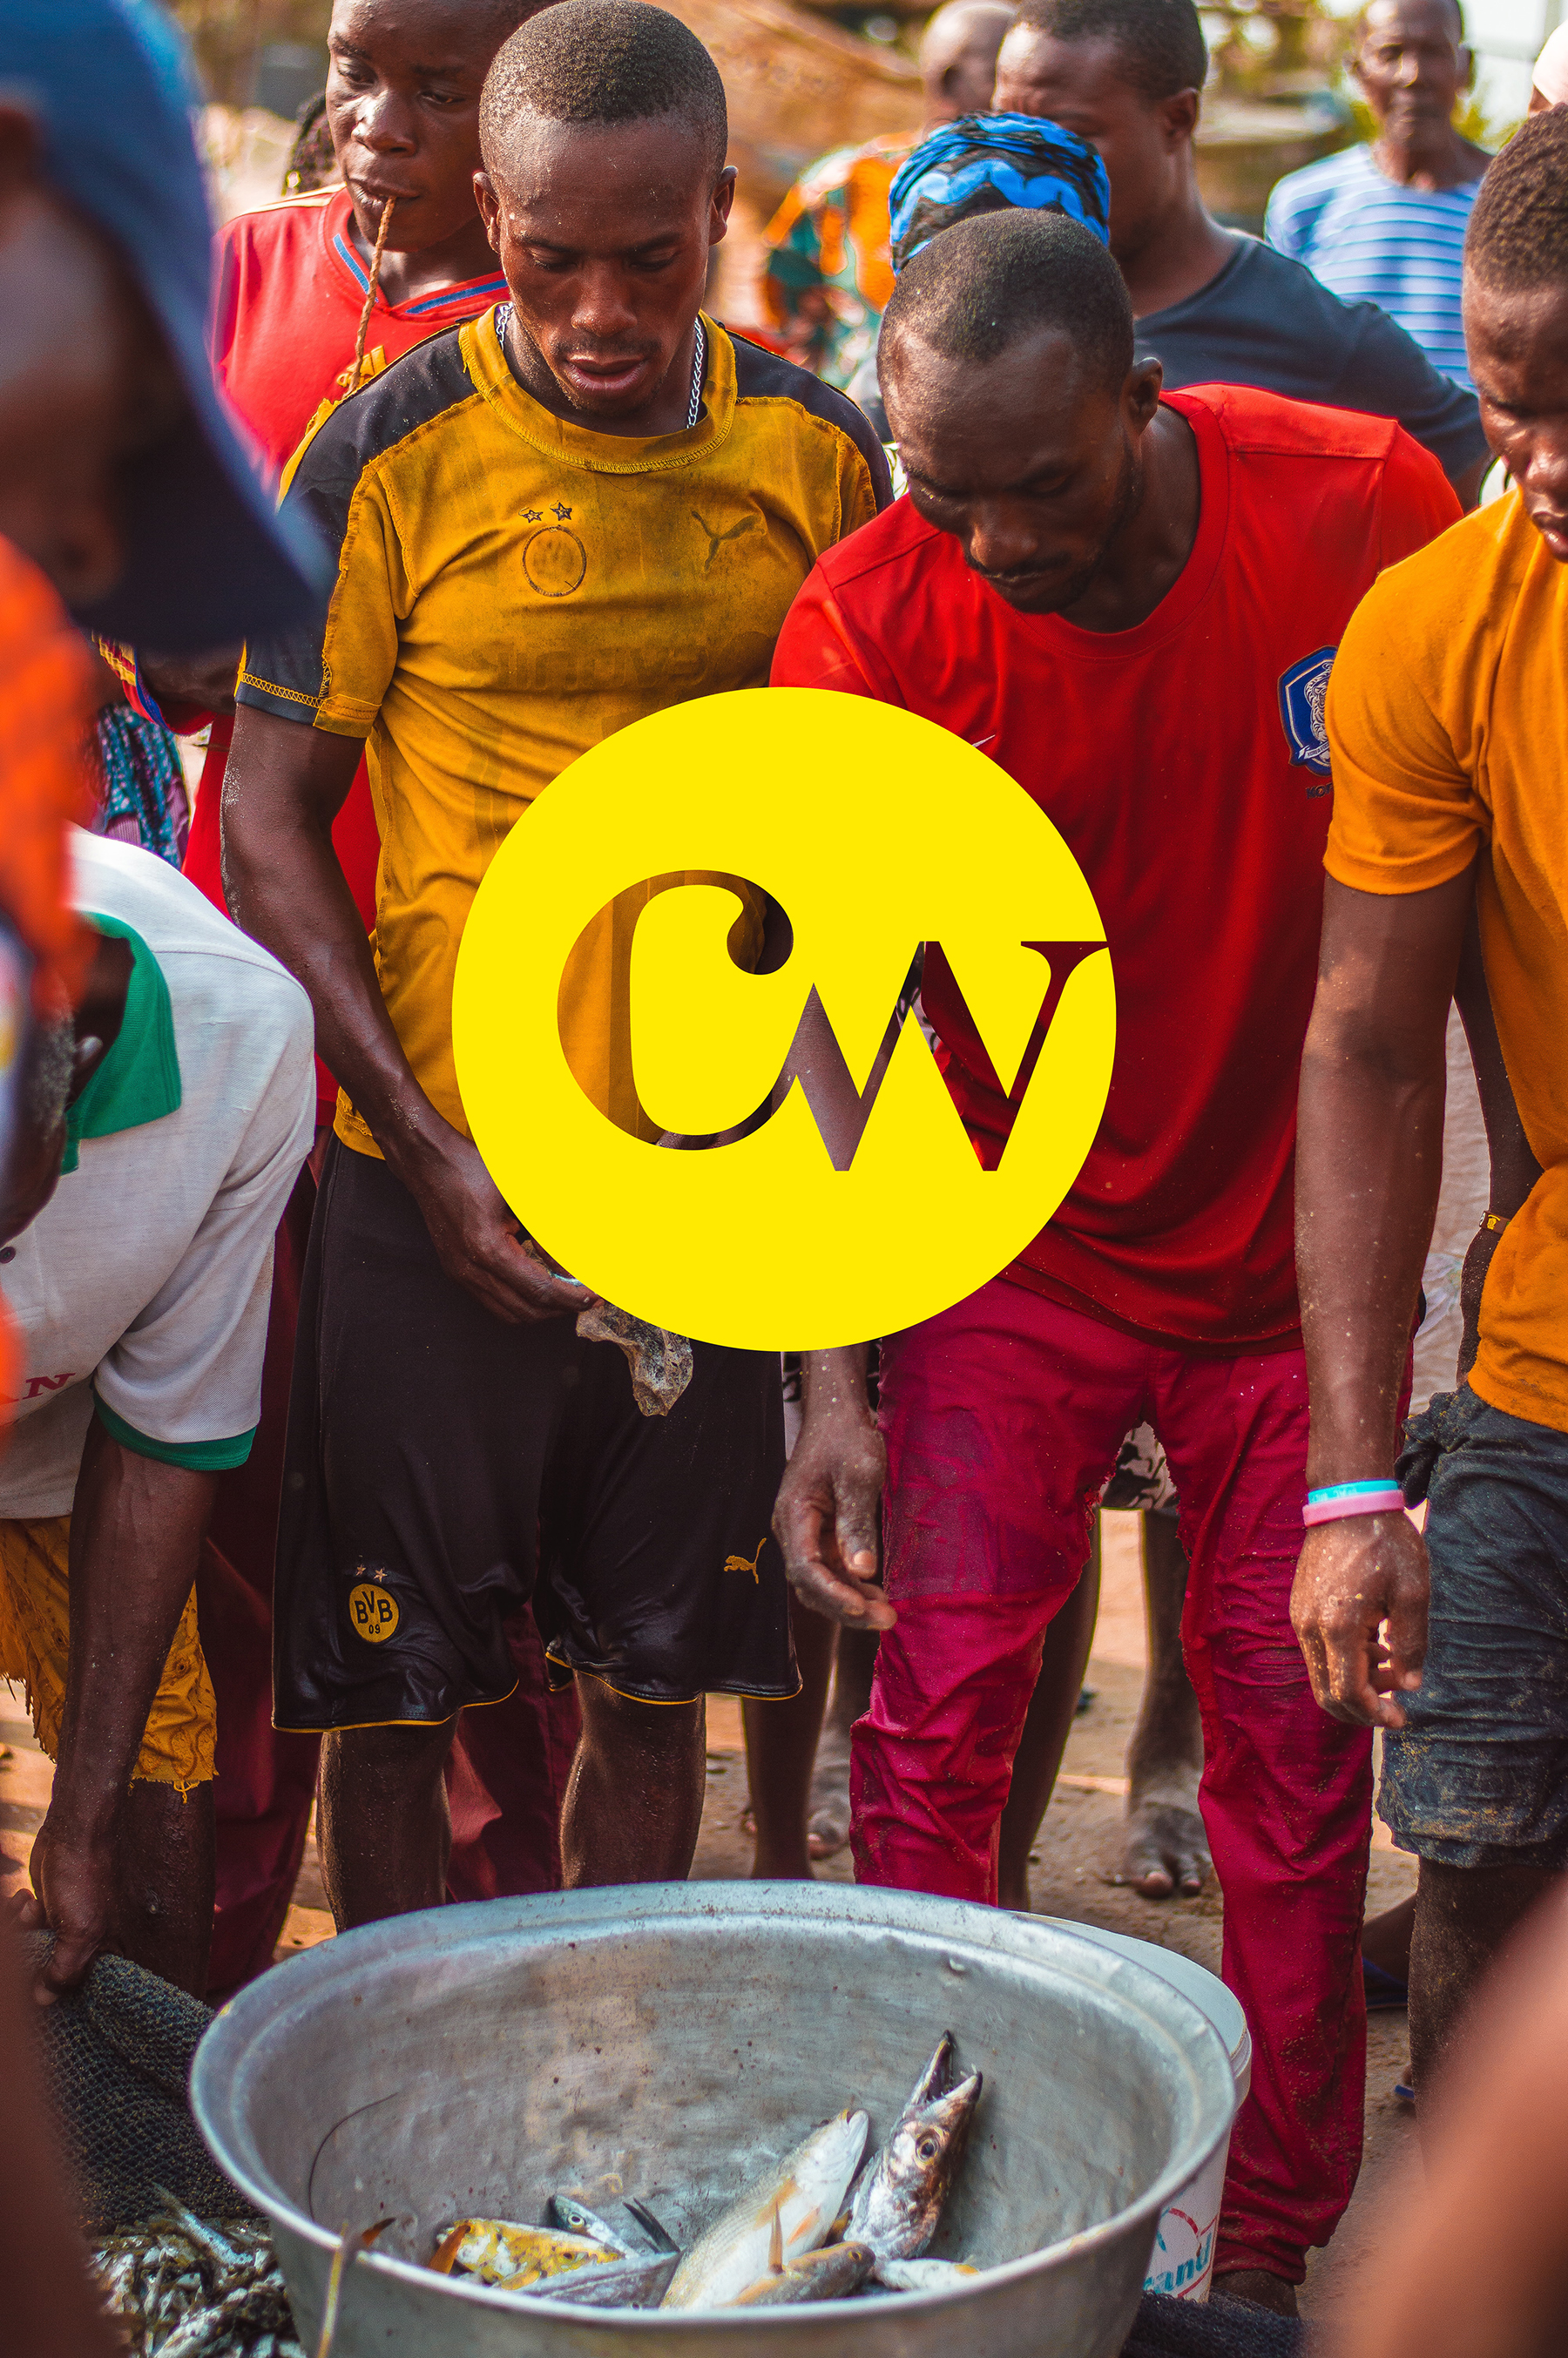 Chronicle World's CW logo design featuring a group of African men at a fish market.